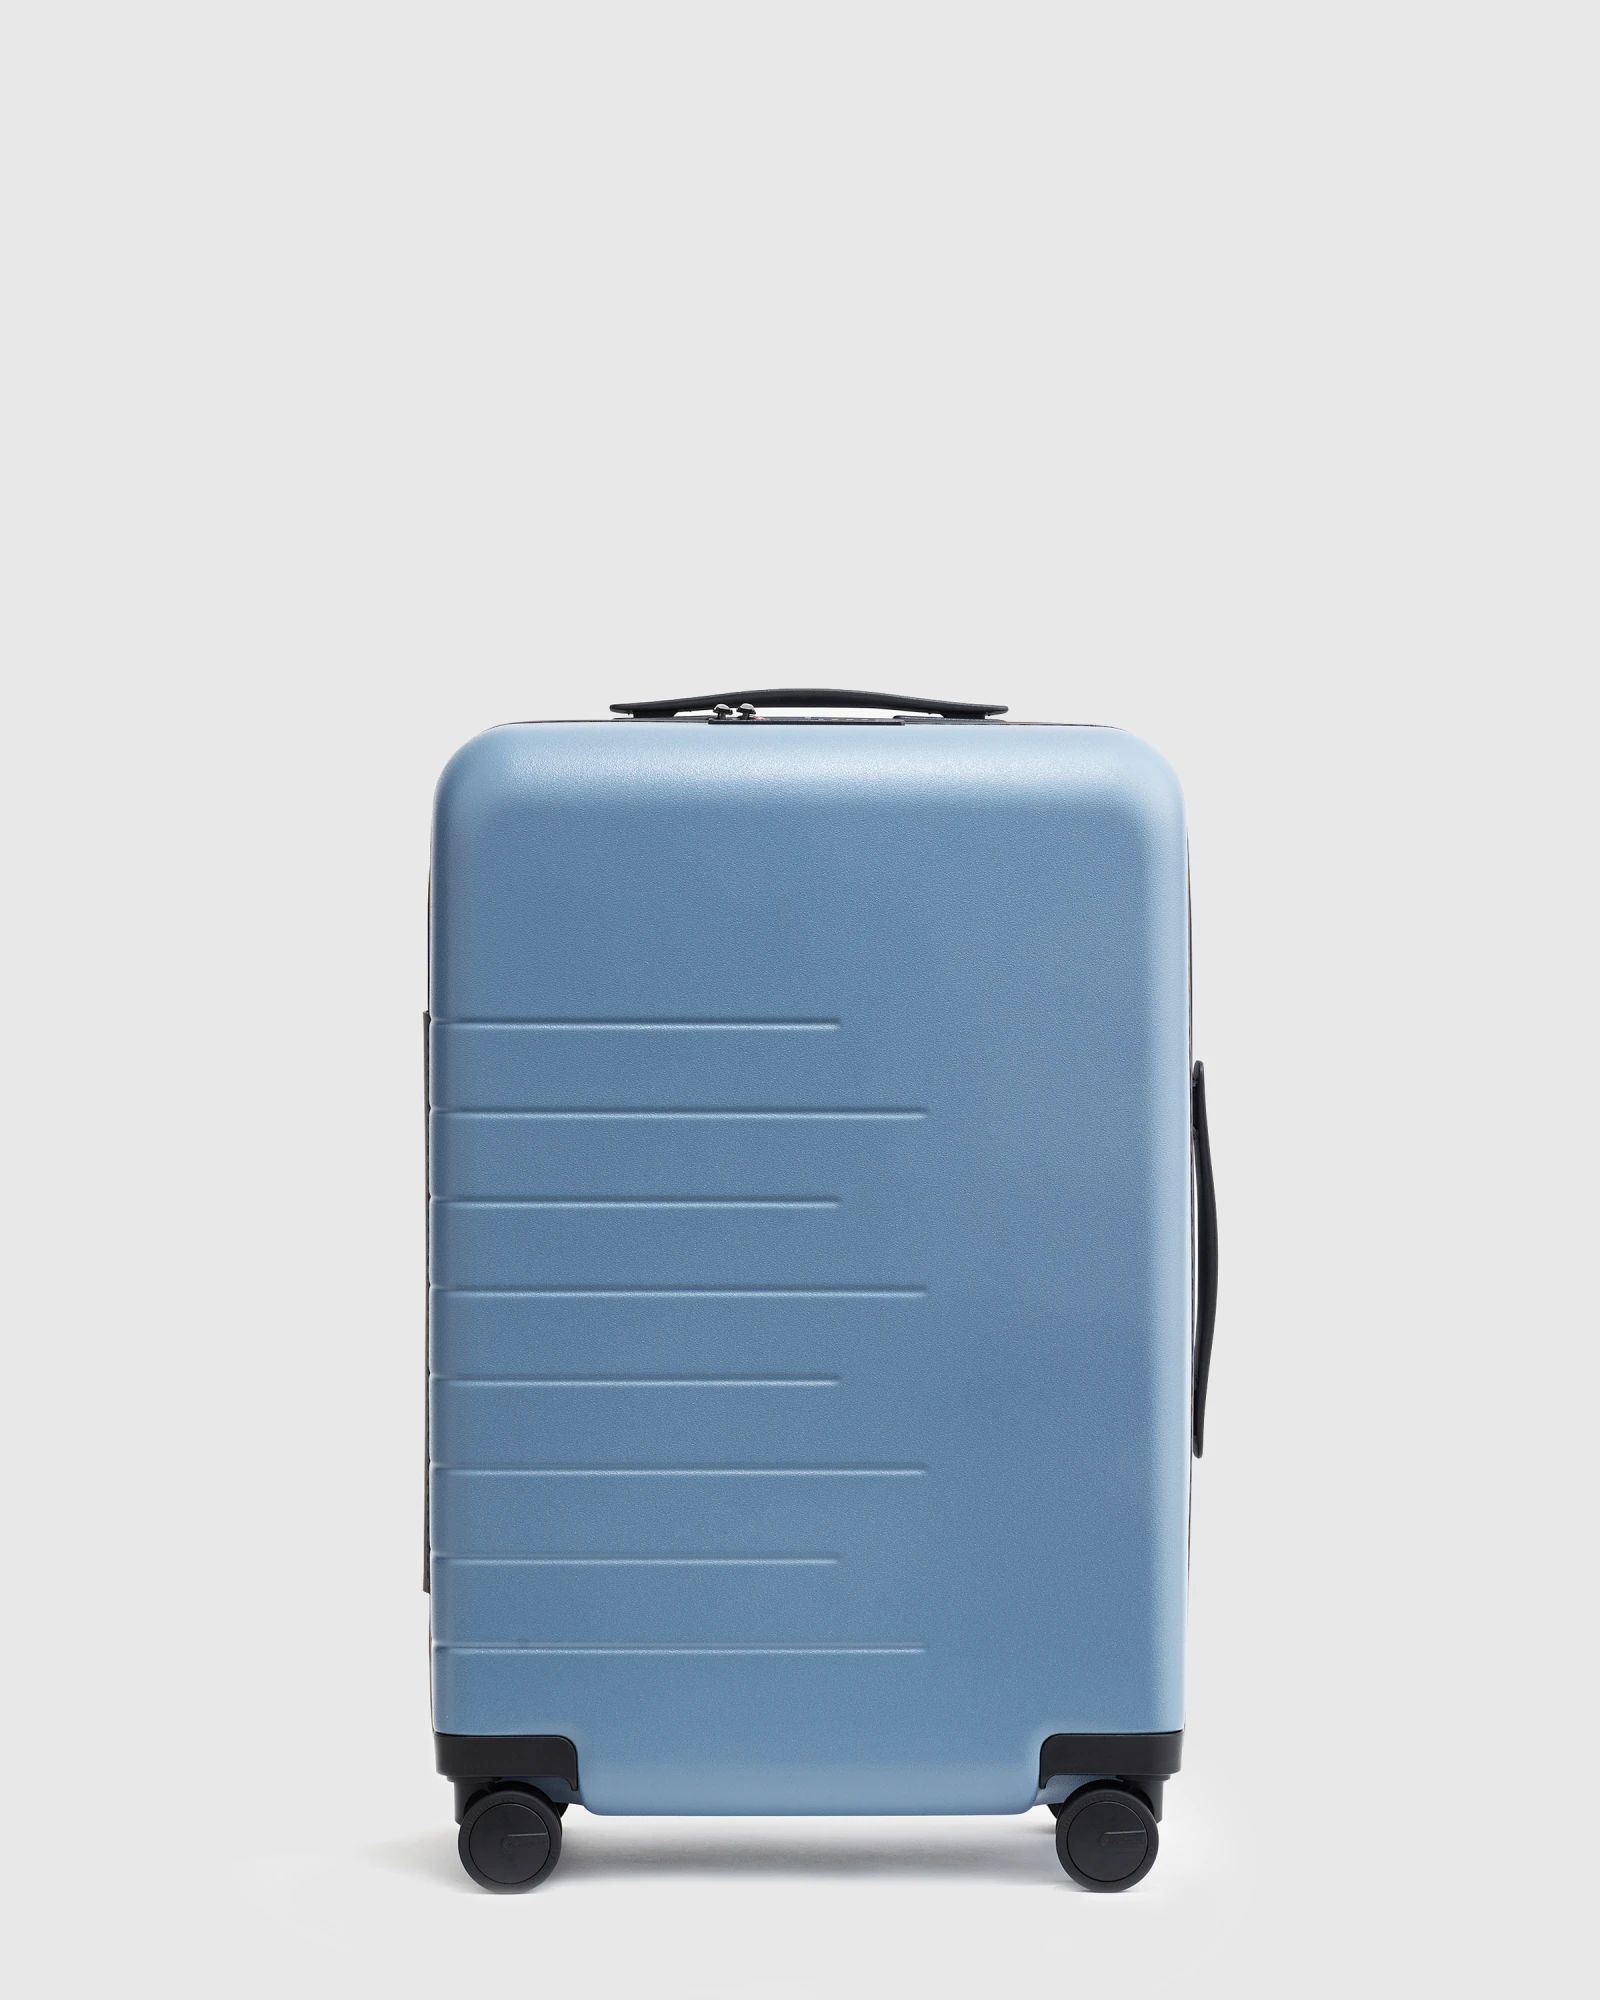 Carry-On Hard Shell Suitcase - 21" | Quince